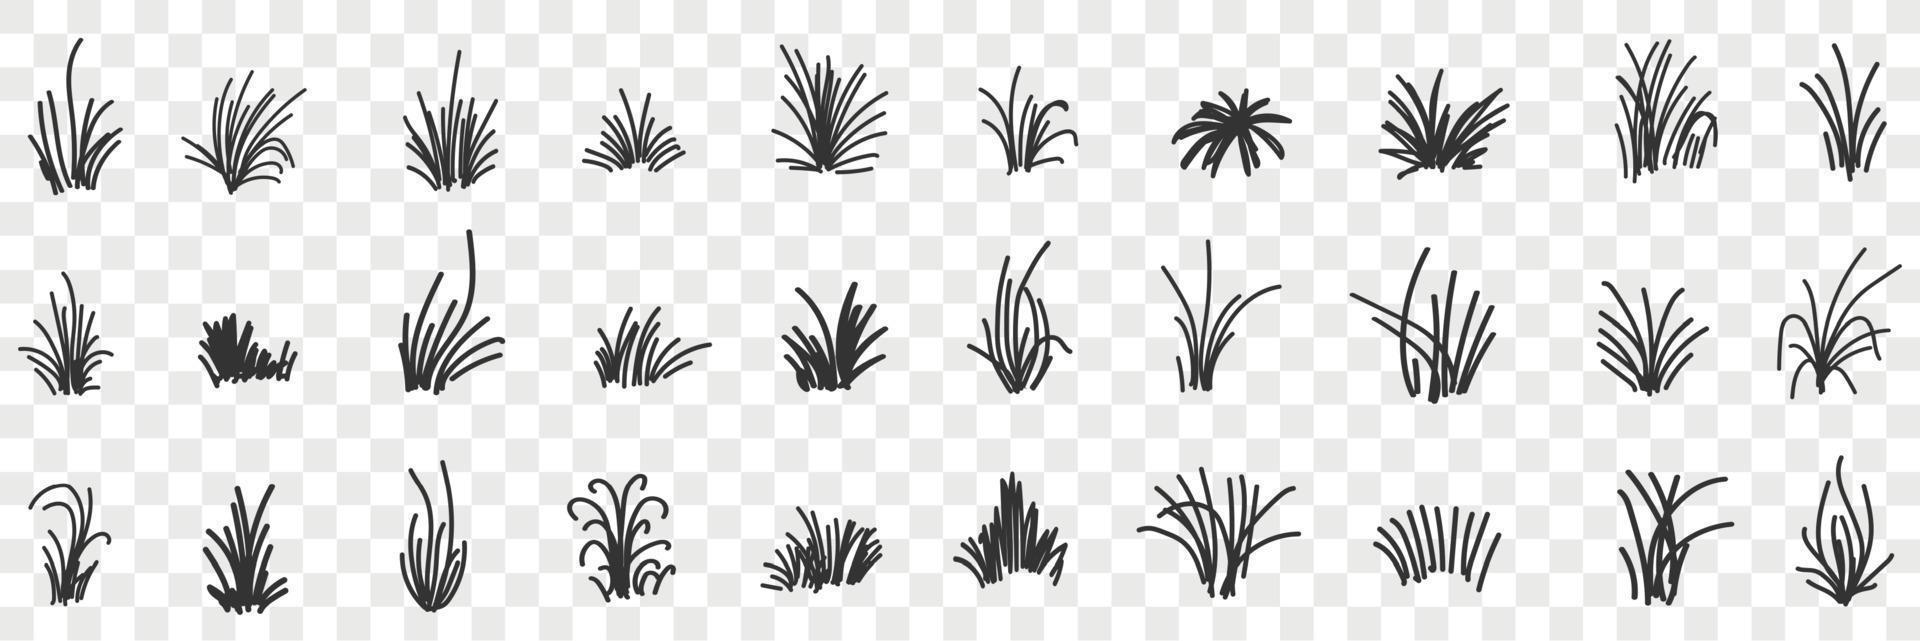 Grass natural pattern doodle set. Collection of hand drawn various growing bunches of grass natural pattern newspaper isolated on transparent background vector